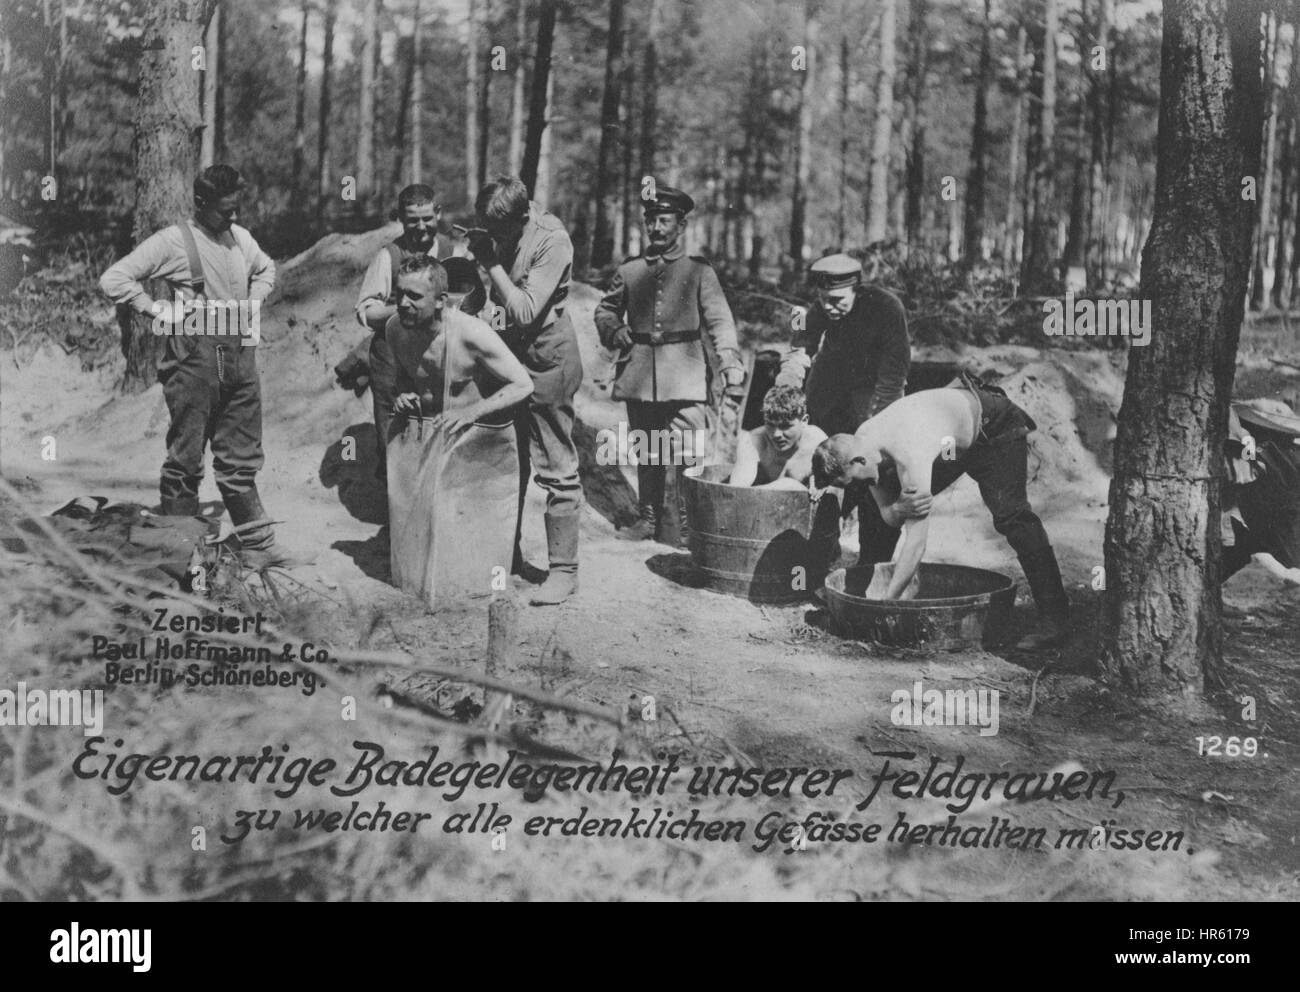 German soldiers bathing in barrels, World War I, 1915. From the New York Public Library. Stock Photo